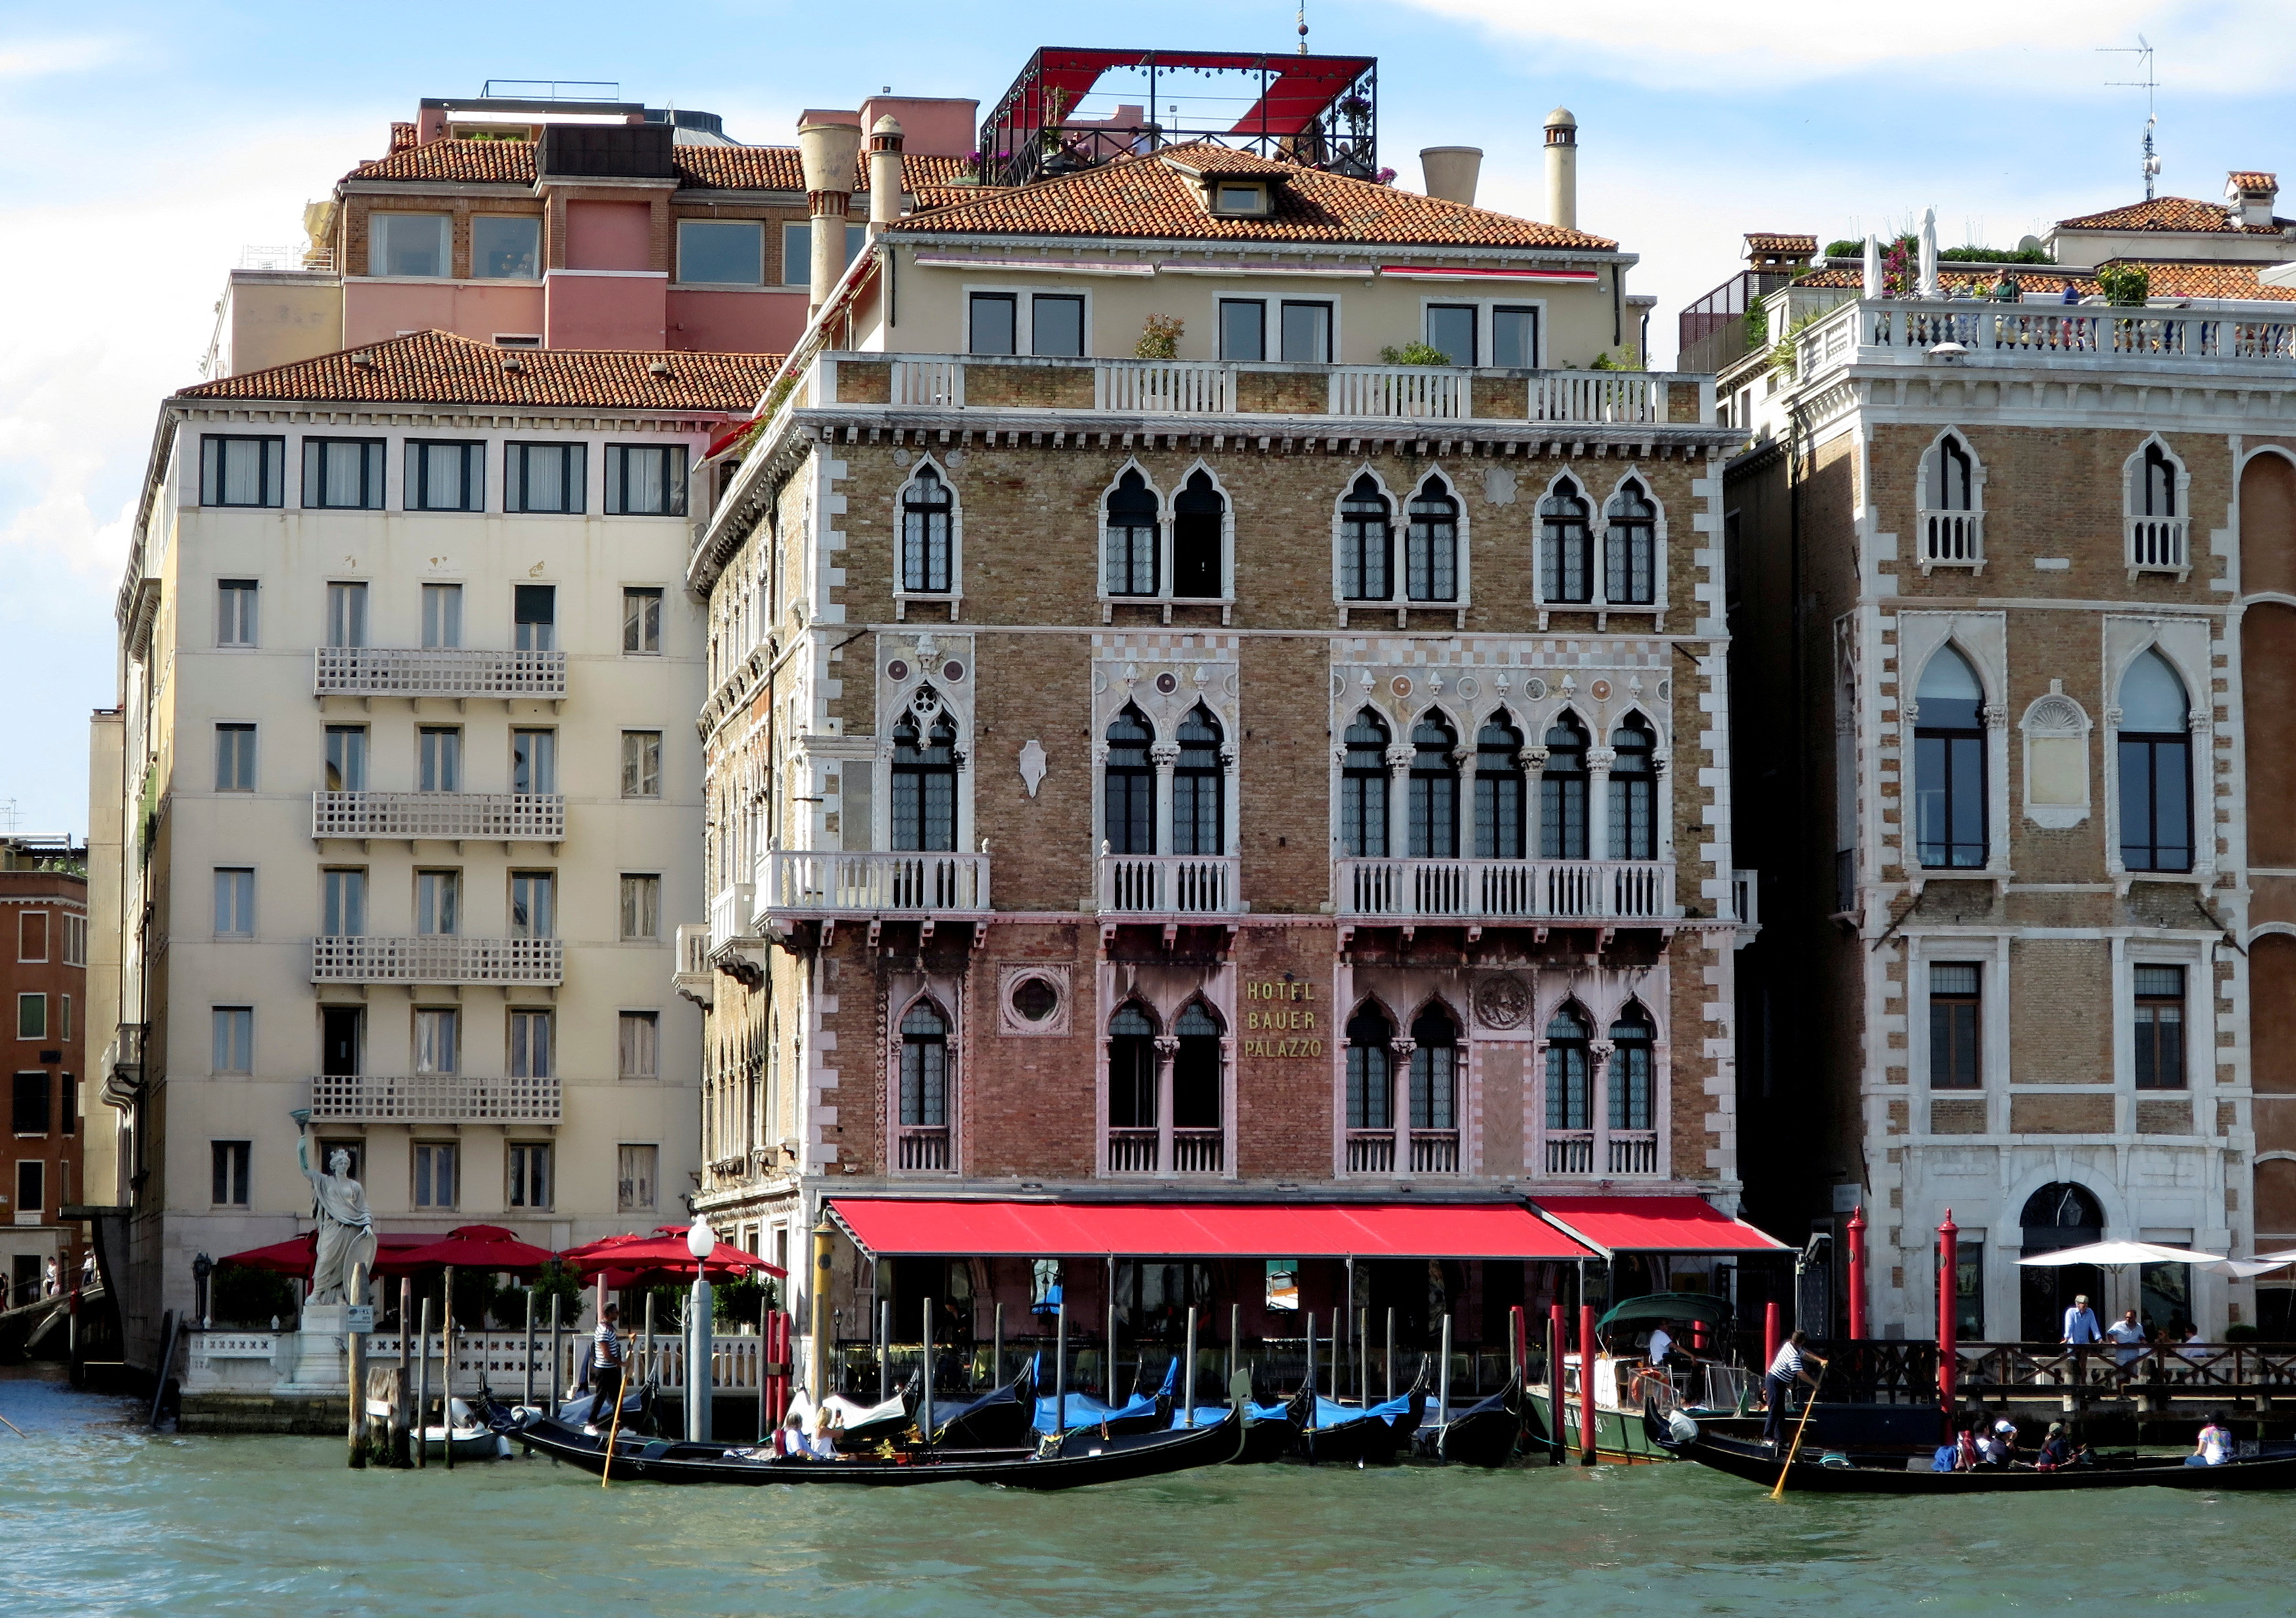 The Bauer luxury hotel at the Grand Canal is pictured in Venice